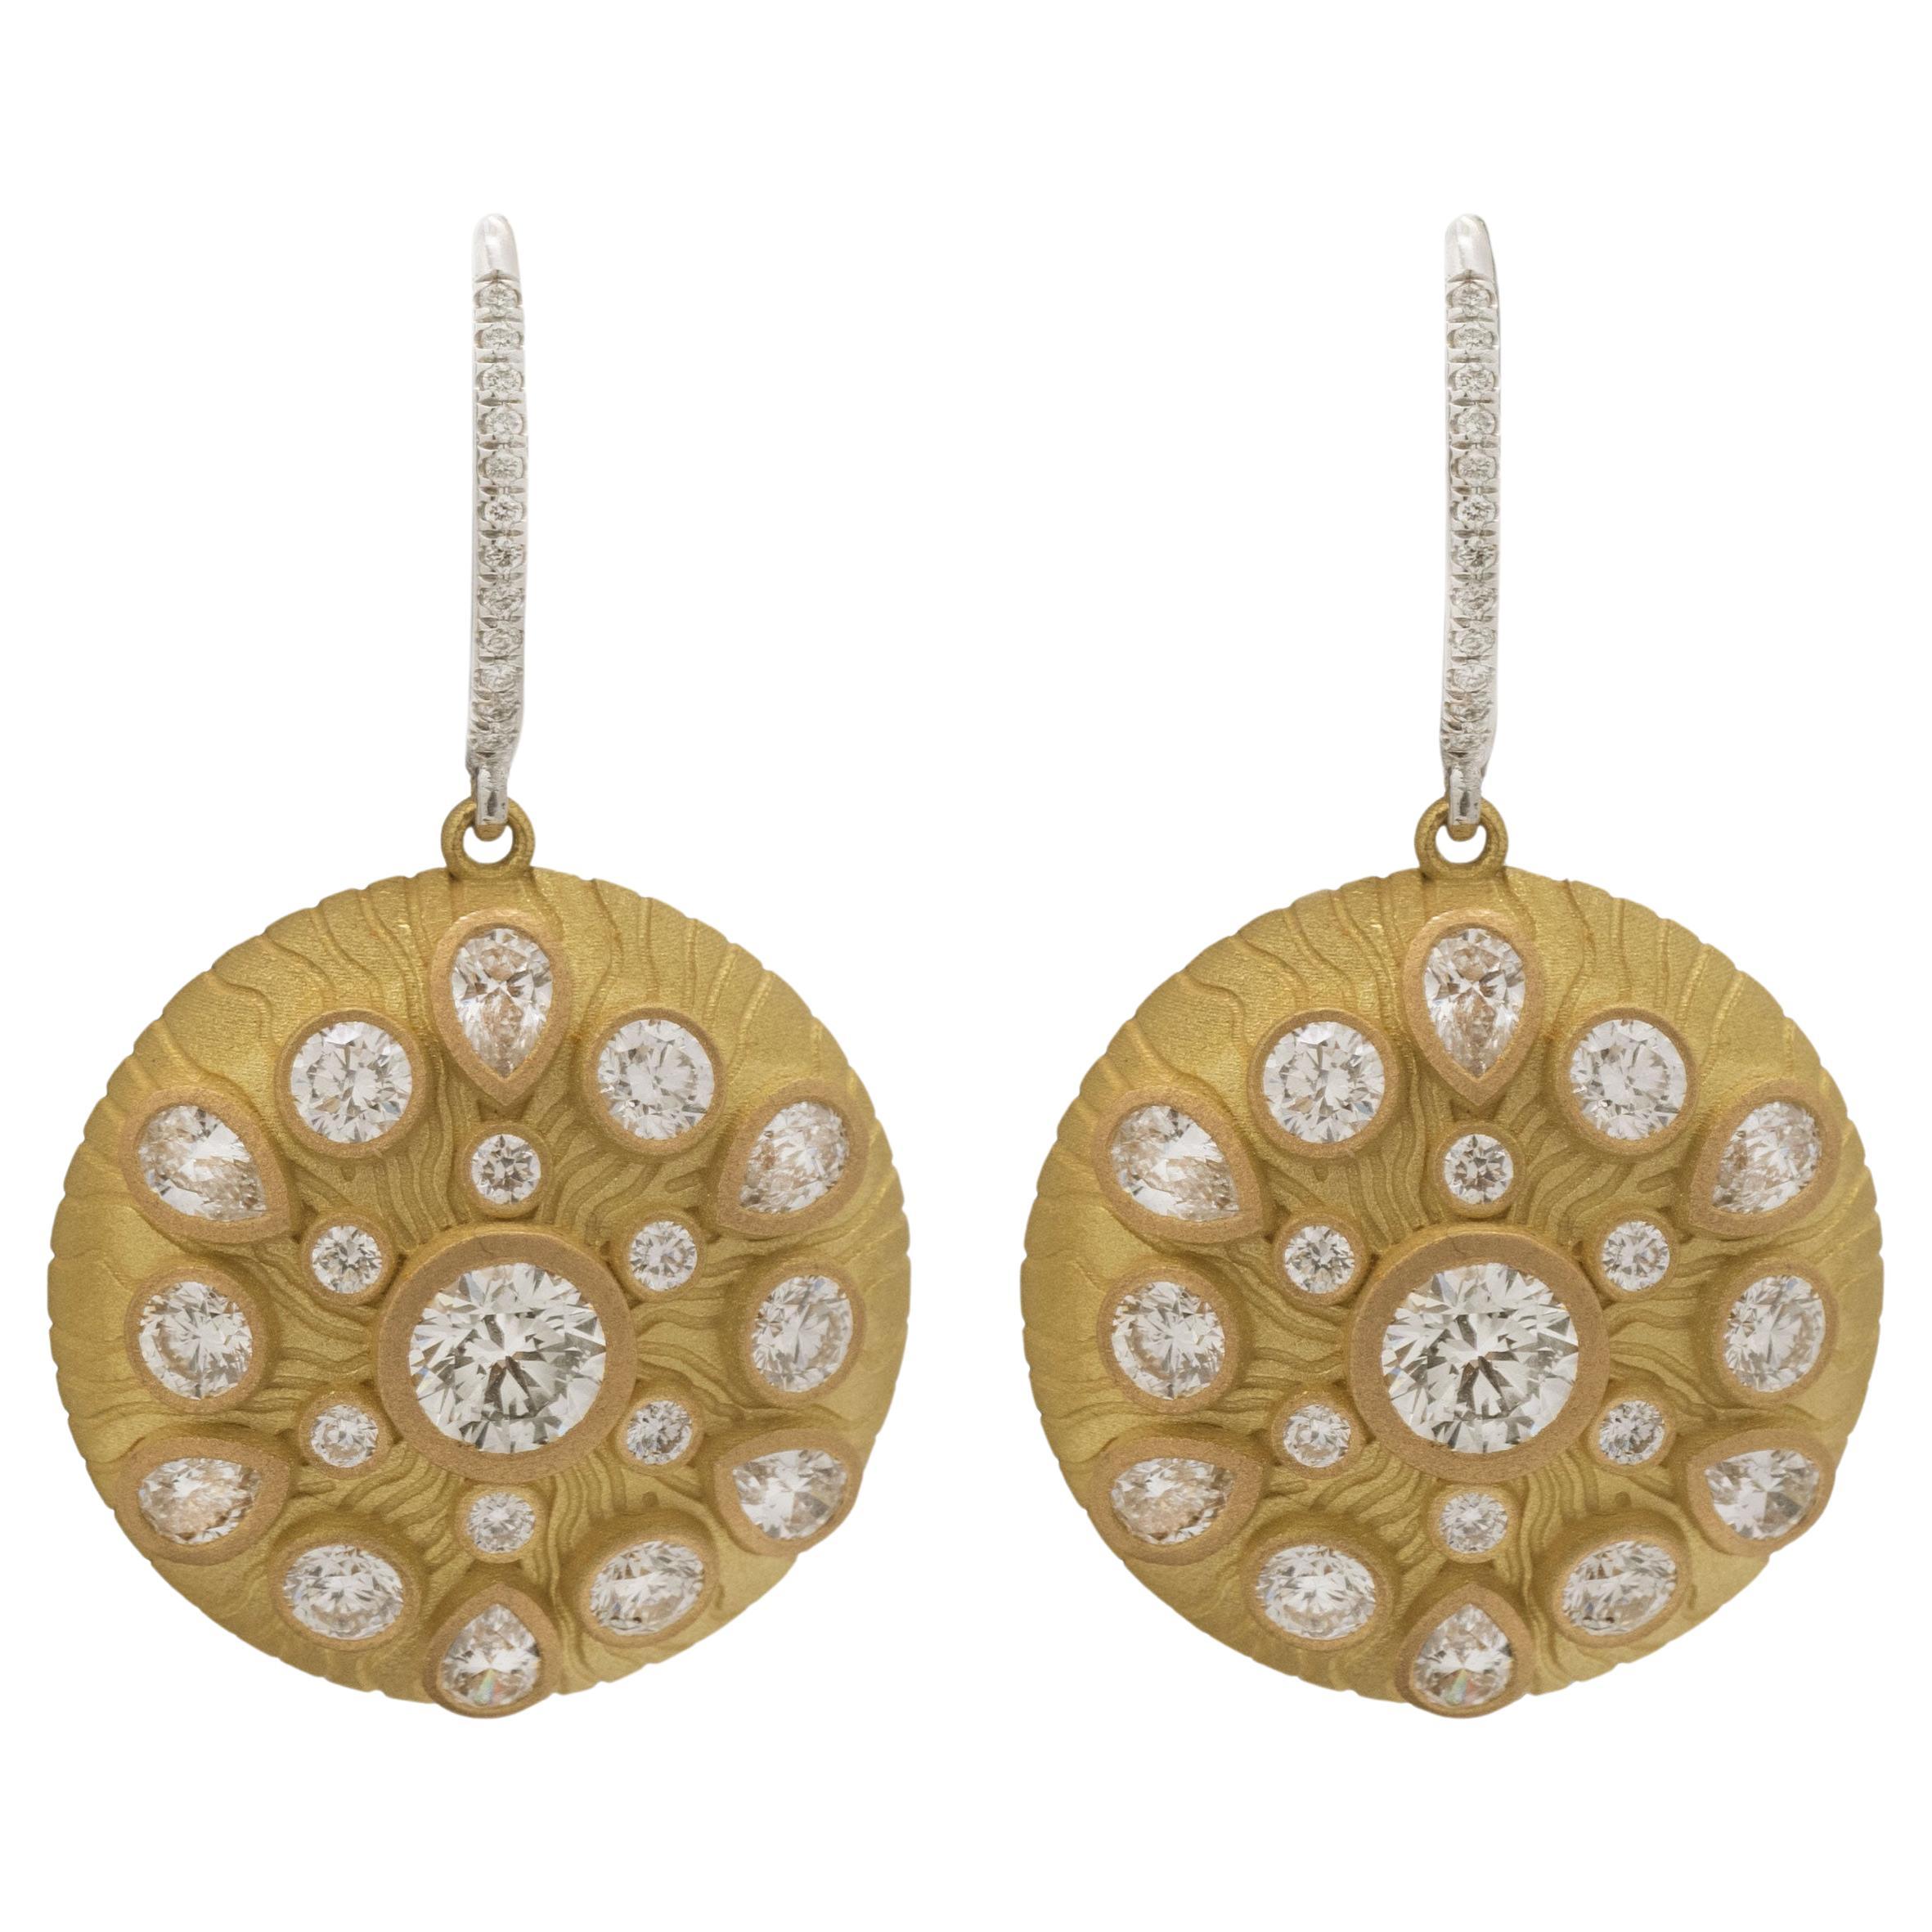 Medallion Earrings with Mixed Shaped Diamonds in 18K Gold